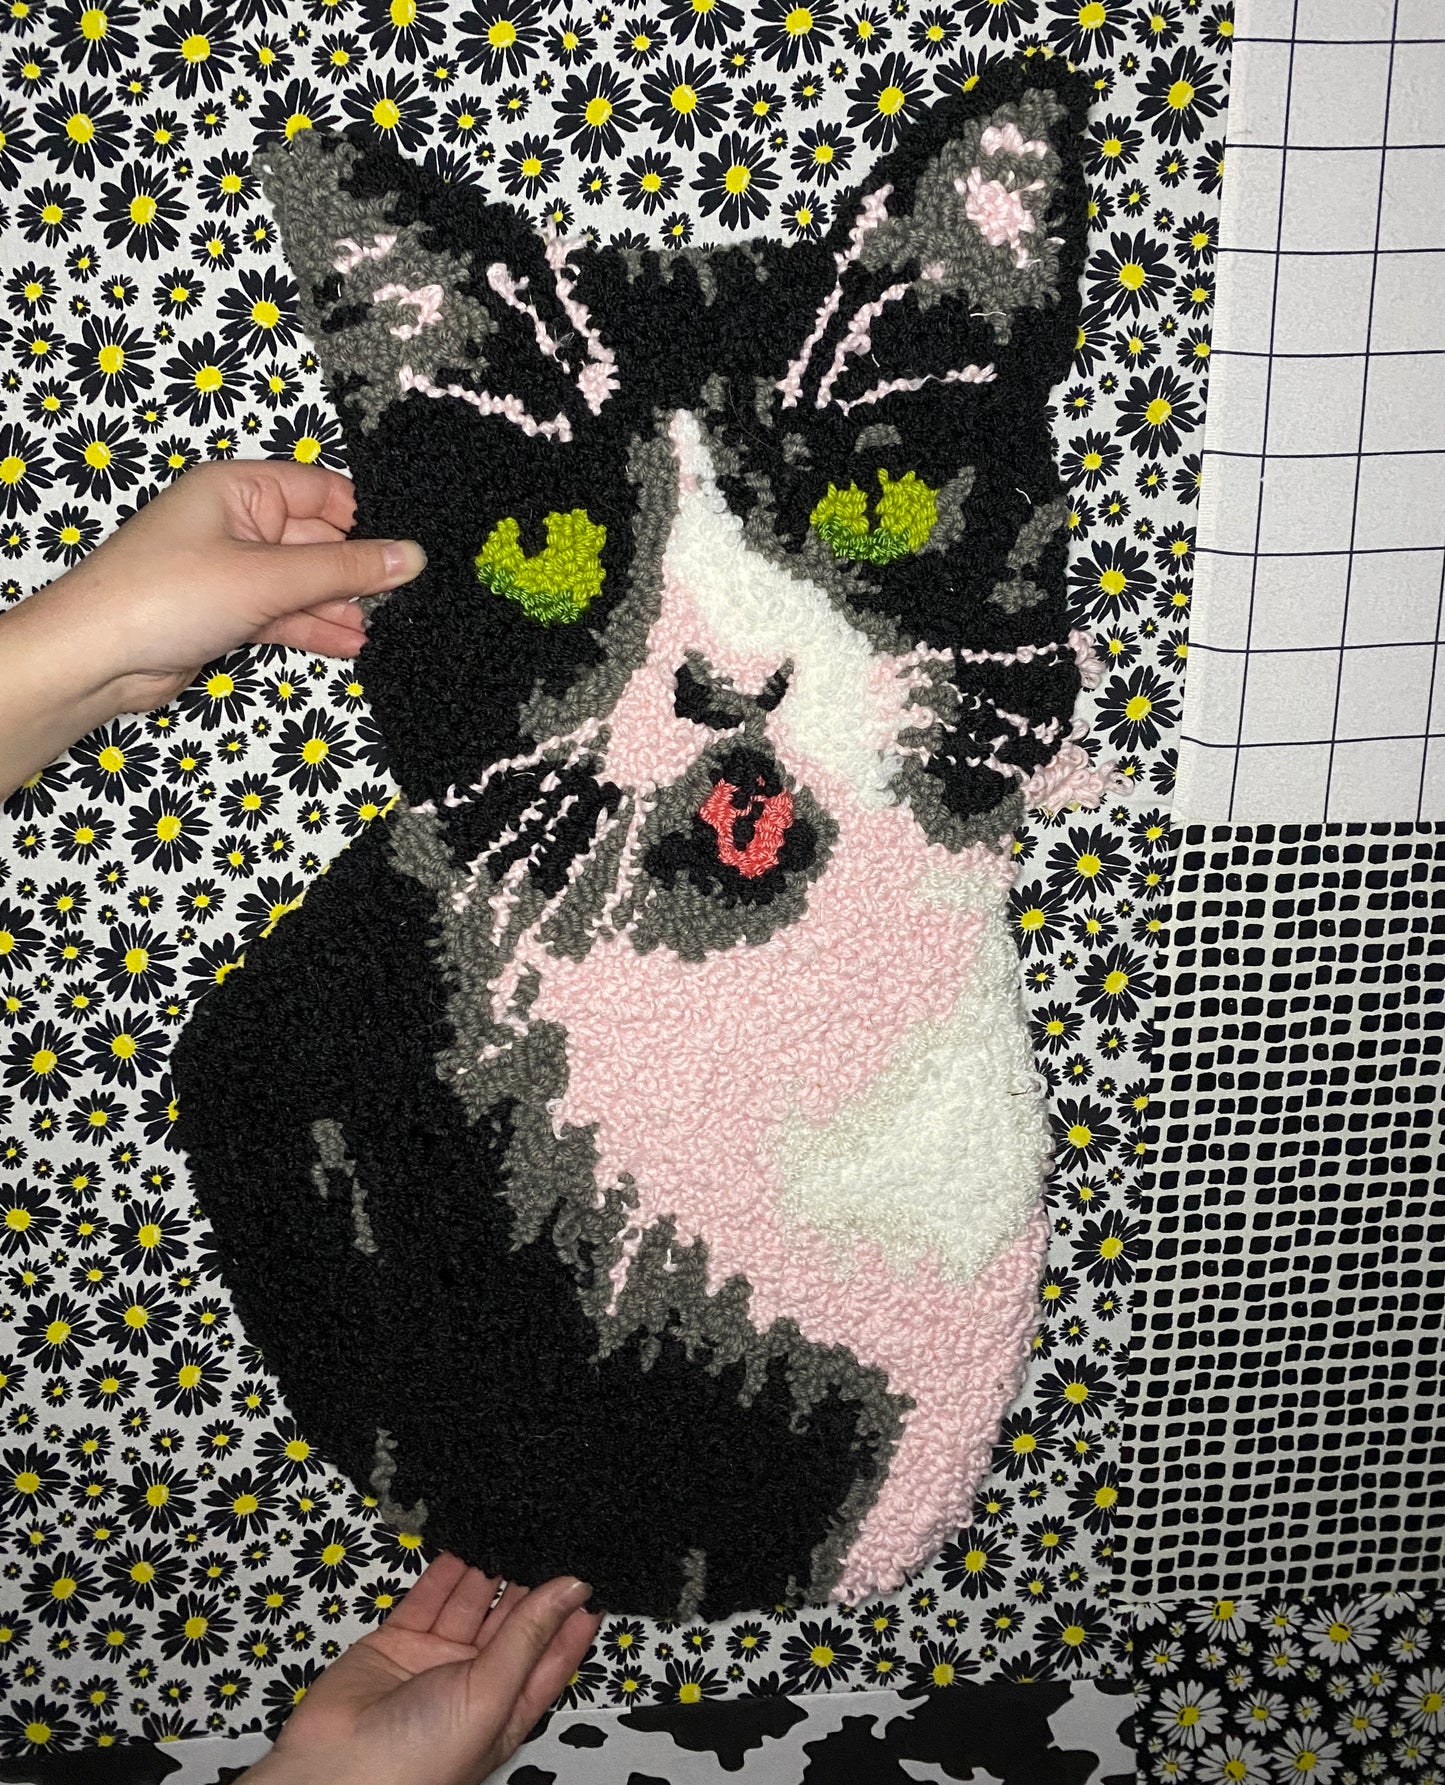 Commissioned Custom Rug Pet Portrait | Turn Your Pet Into A Rug! | Made to Order